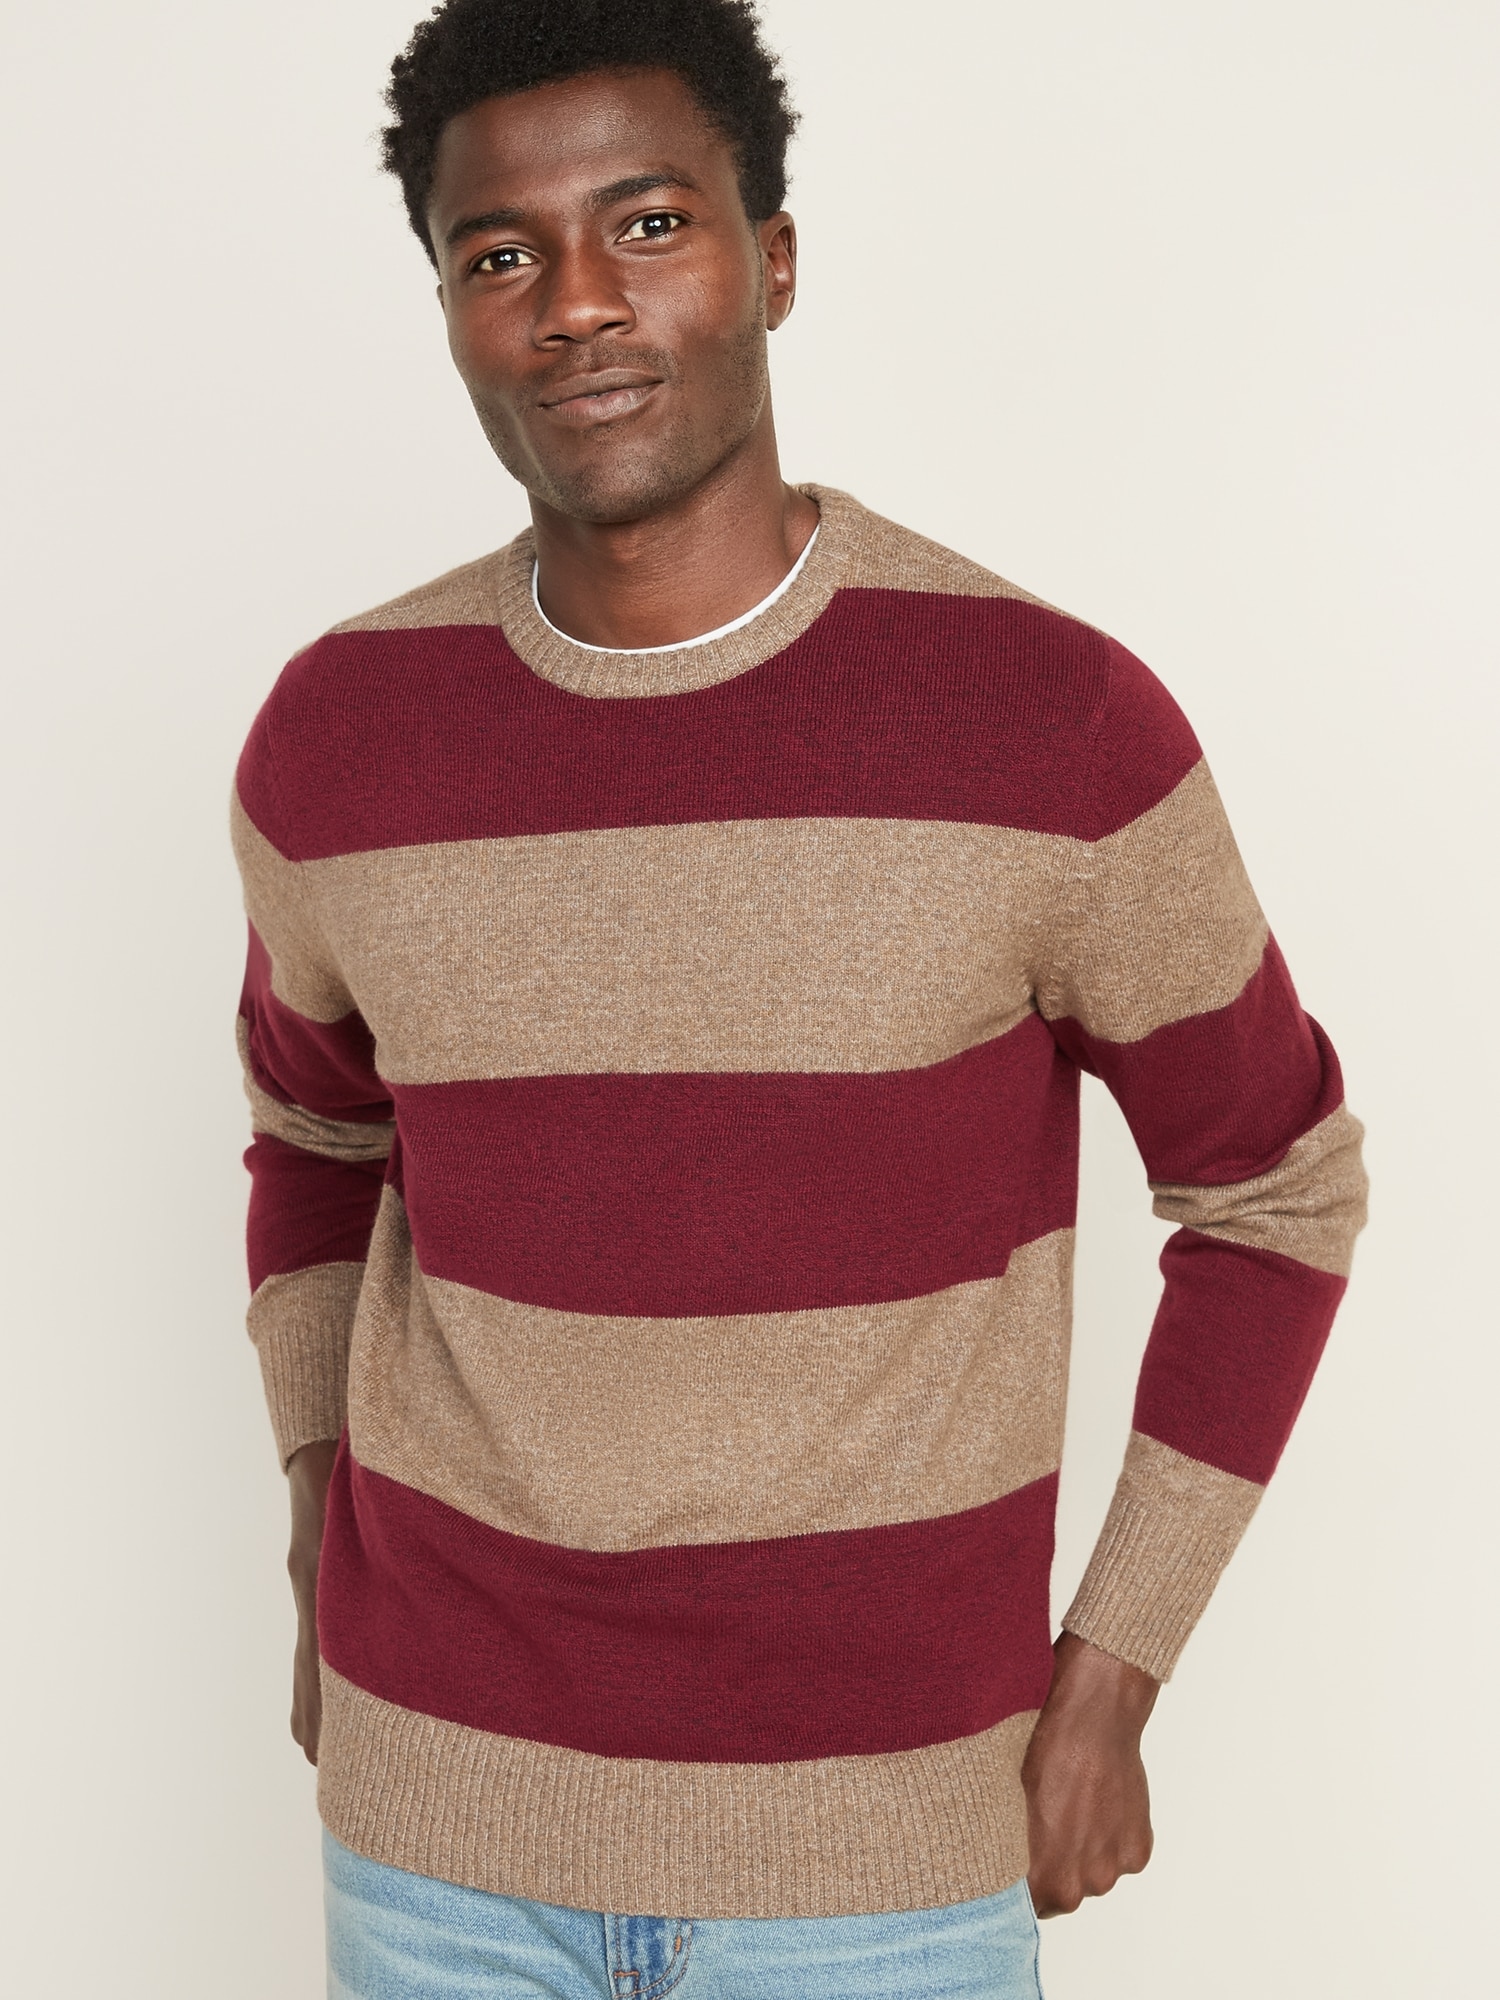 Super-Soft Striped Crew-Neck Sweater for Men | Old Navy